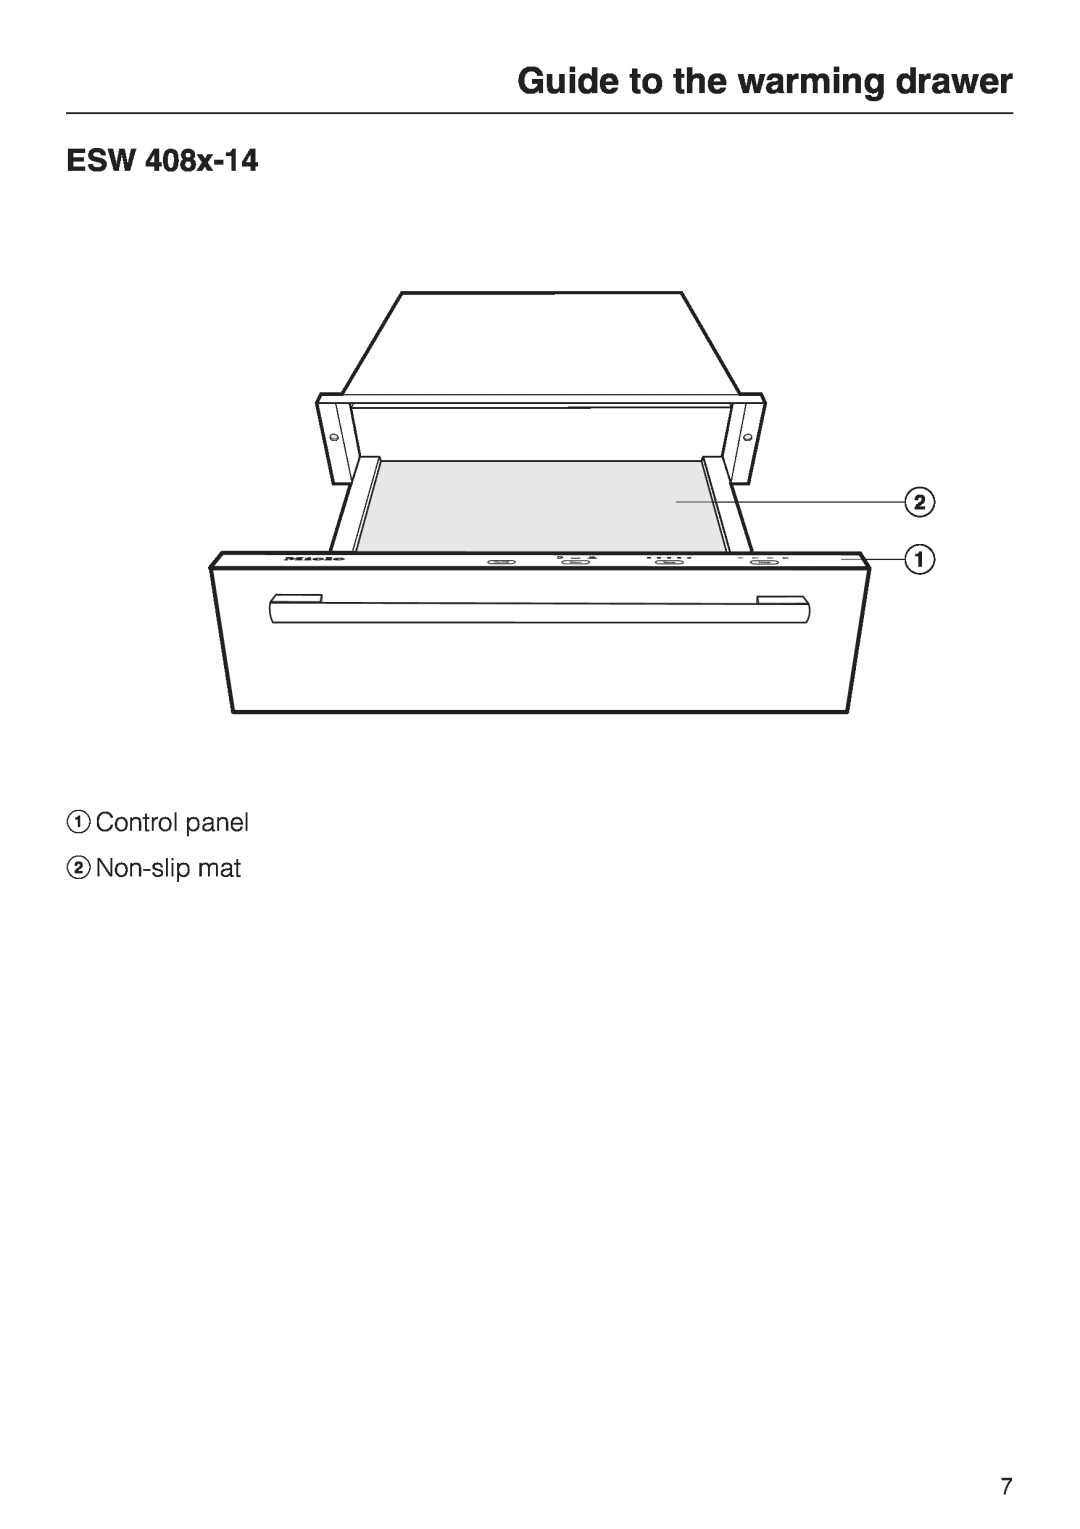 Miele ESW 408X-14, ESW48XX installation instructions Guide to the warming drawer 